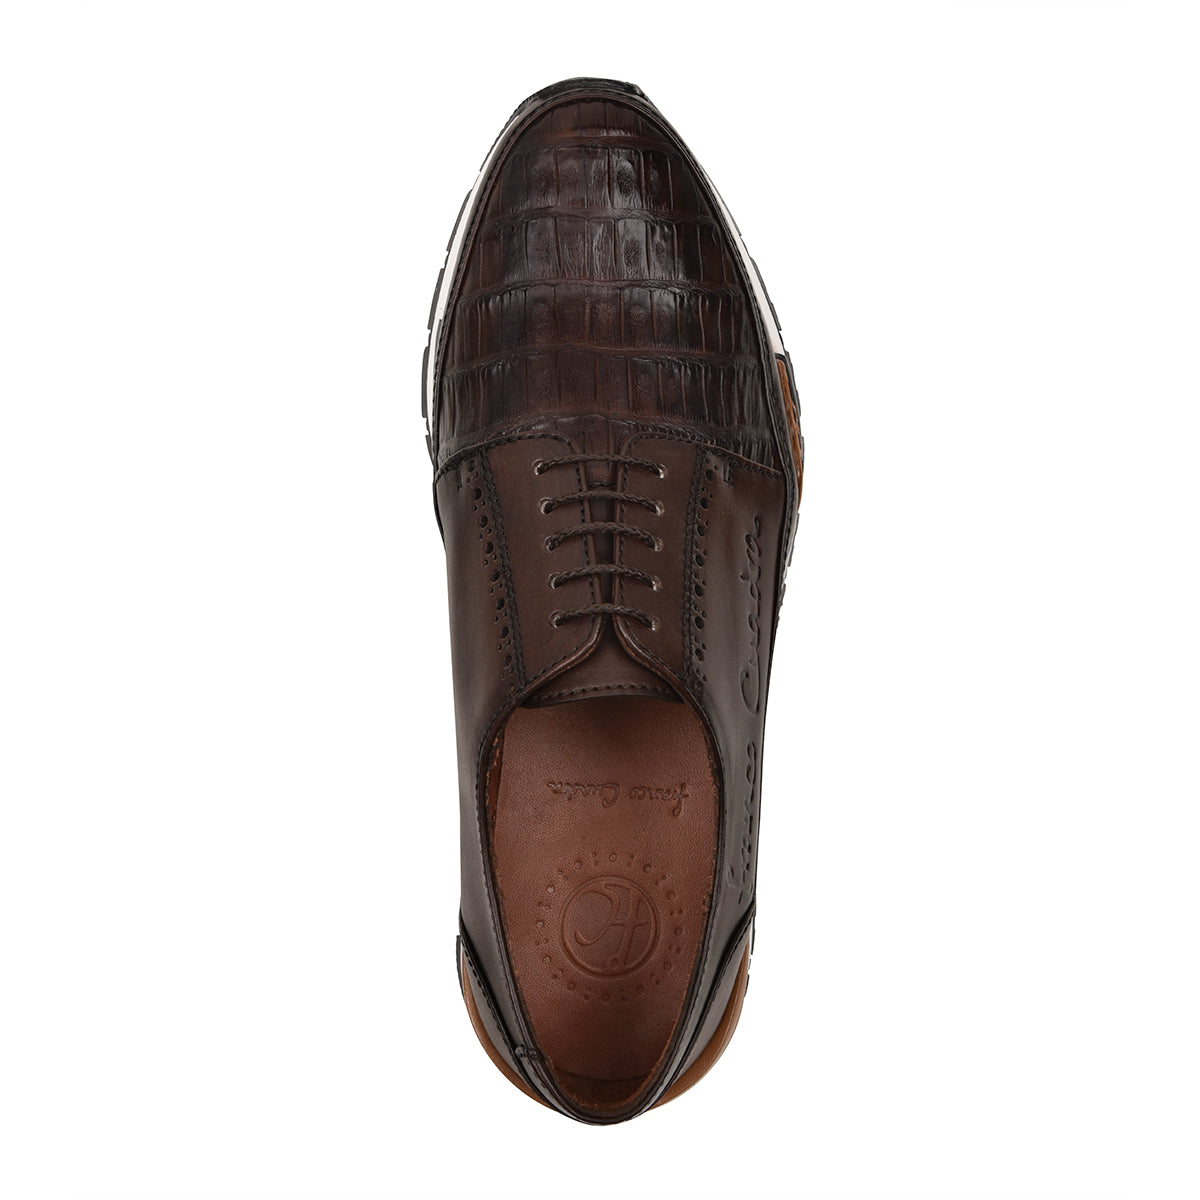 Brown exotic leather shoes with laces